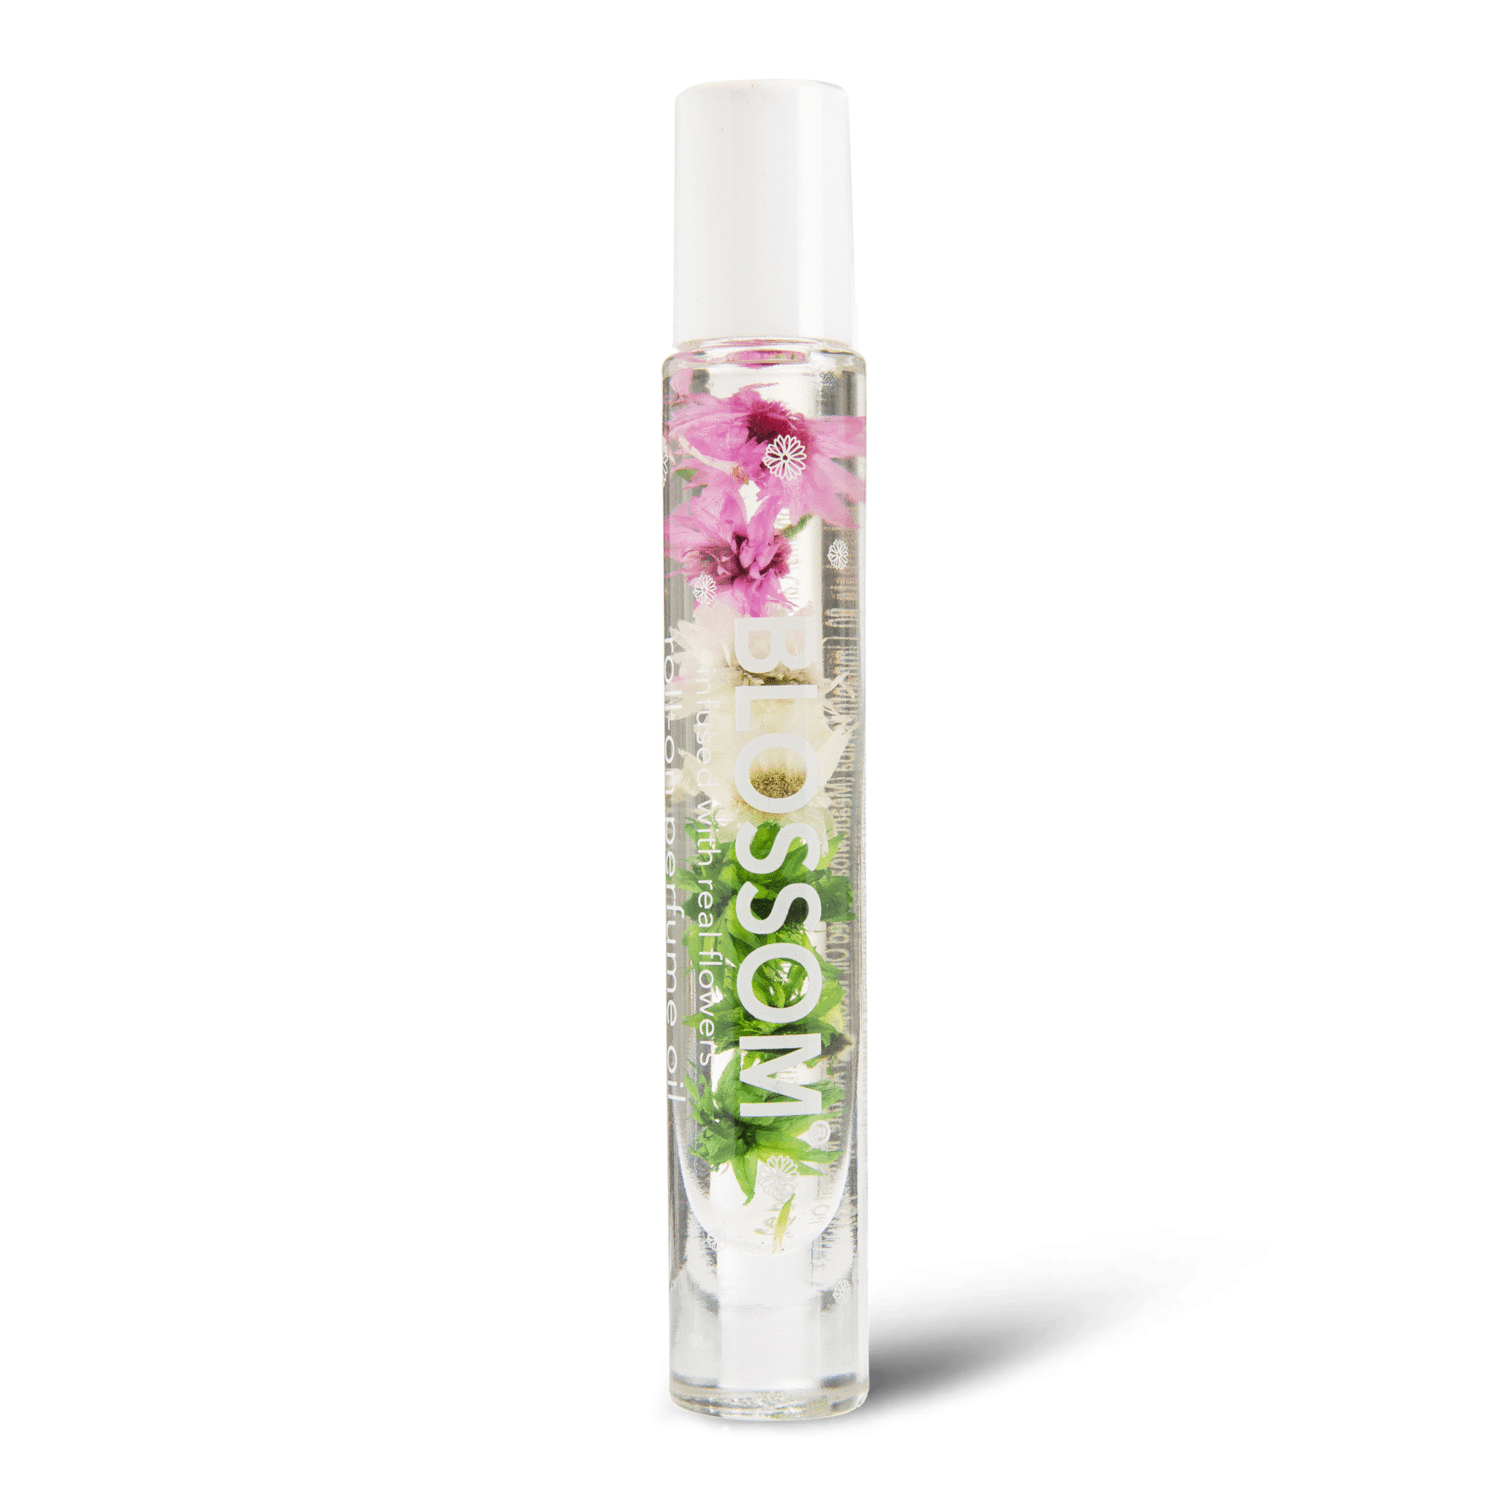 All-Natural Roll-On Perfume